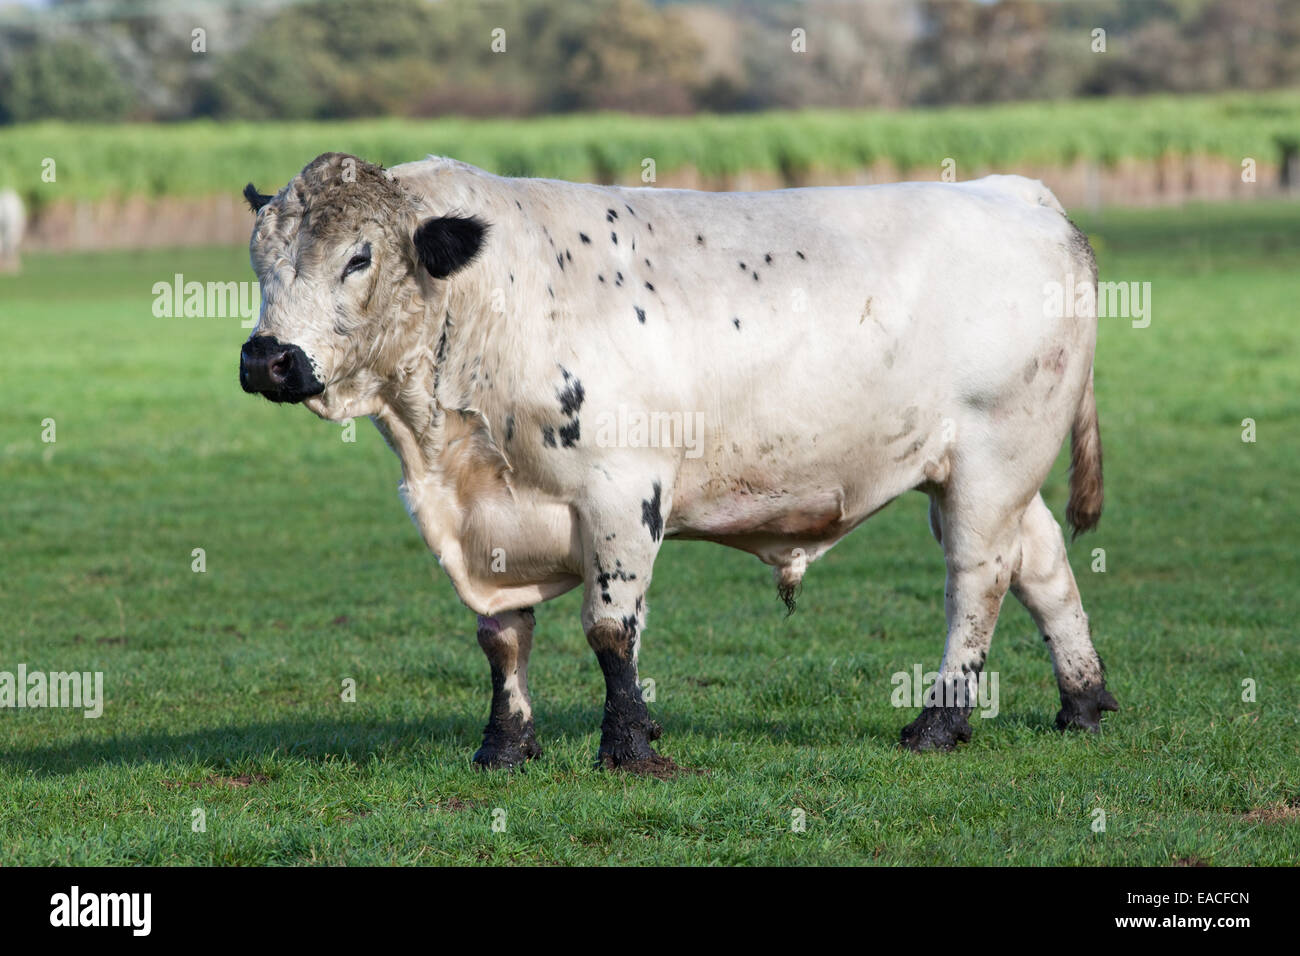 White Park Bull (Bos taurus). Domestic cattle. Polled, - horns removed. Black points of ears, eye-lids, and muzzle shown. Stock Photo